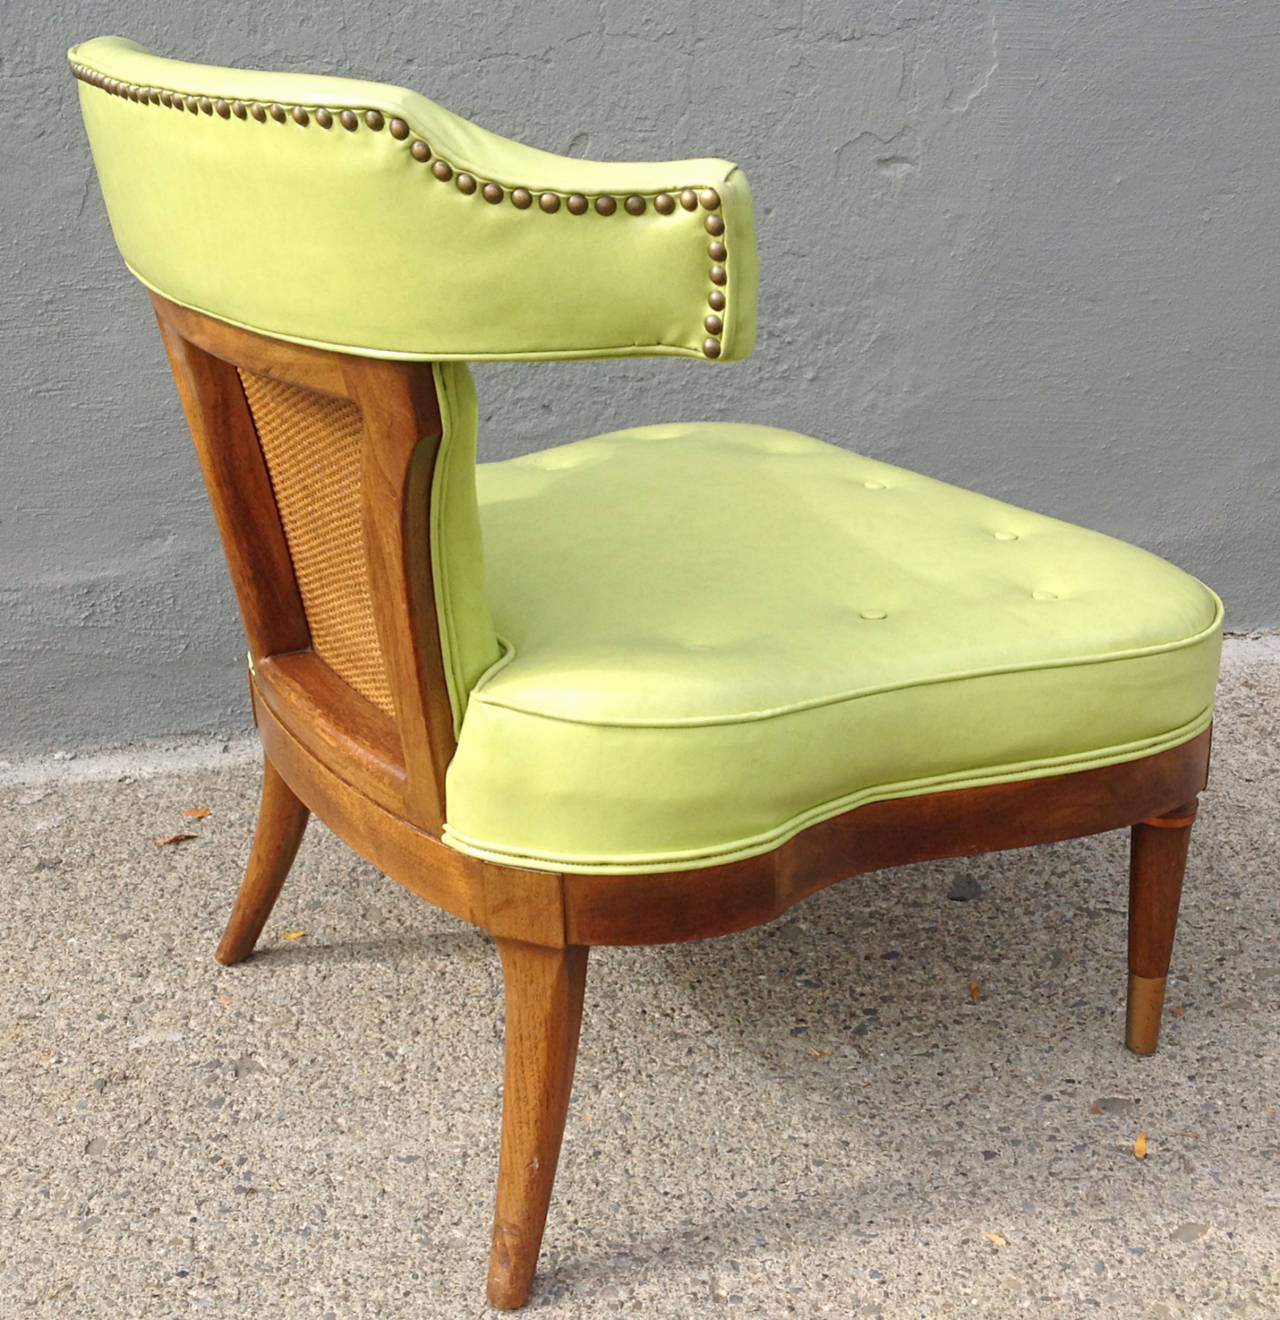 Wonderful low stylish slipper chair by Mastercraft, model 1099 from the Lombardy Collection circa 1954. Exposed walnut frame with cane inset back panel. Saddle shaped buttoned seat with yoke top rail over corseted back. Original chartreuse vinyl